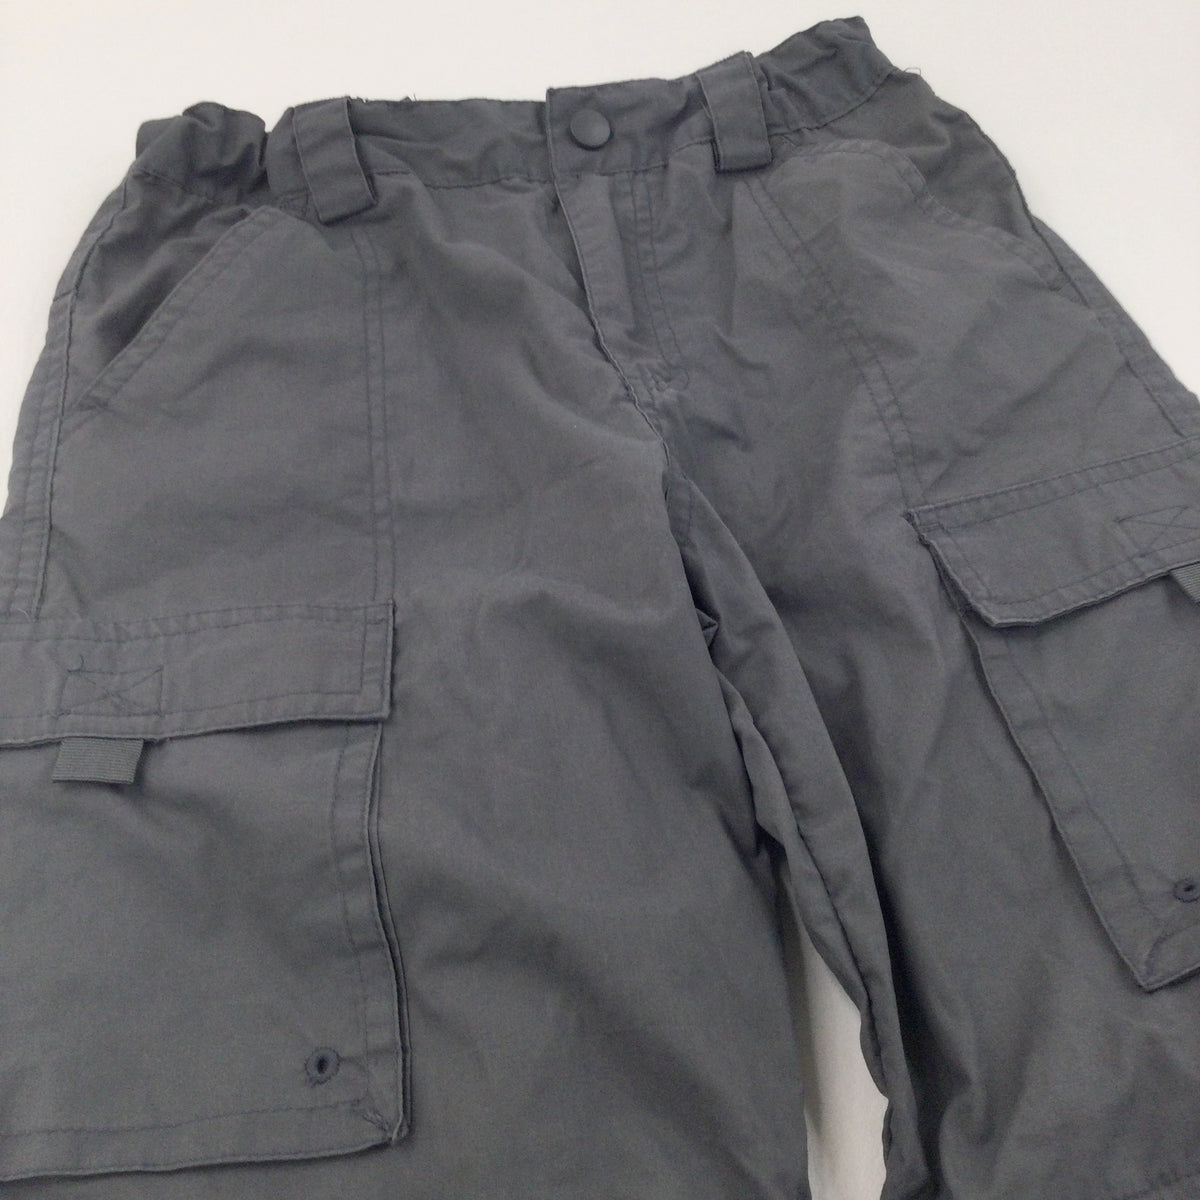 Grey Walking Trousers / Zip Off Shorts with Adjustable Waistband 